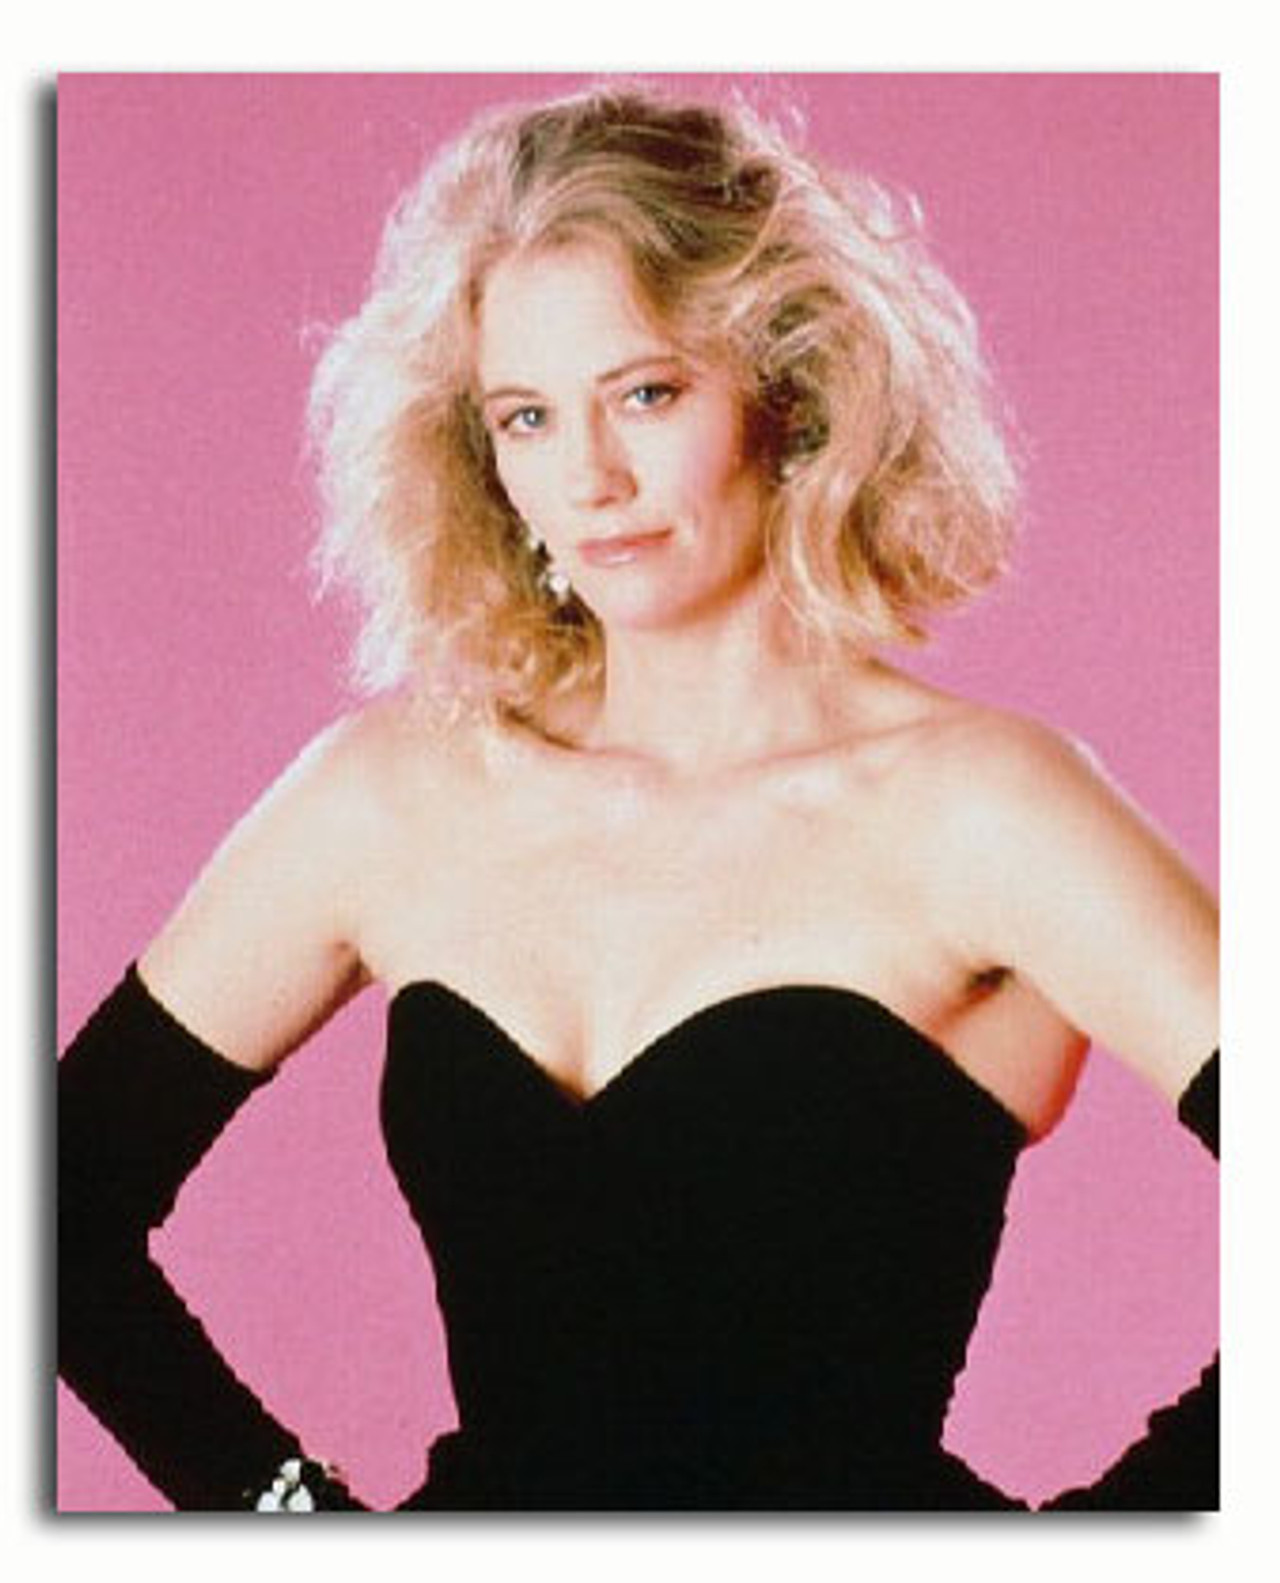 Ss3320798 Movie Picture Of Cybill Shepherd Buy Celebrity Photos And Posters At